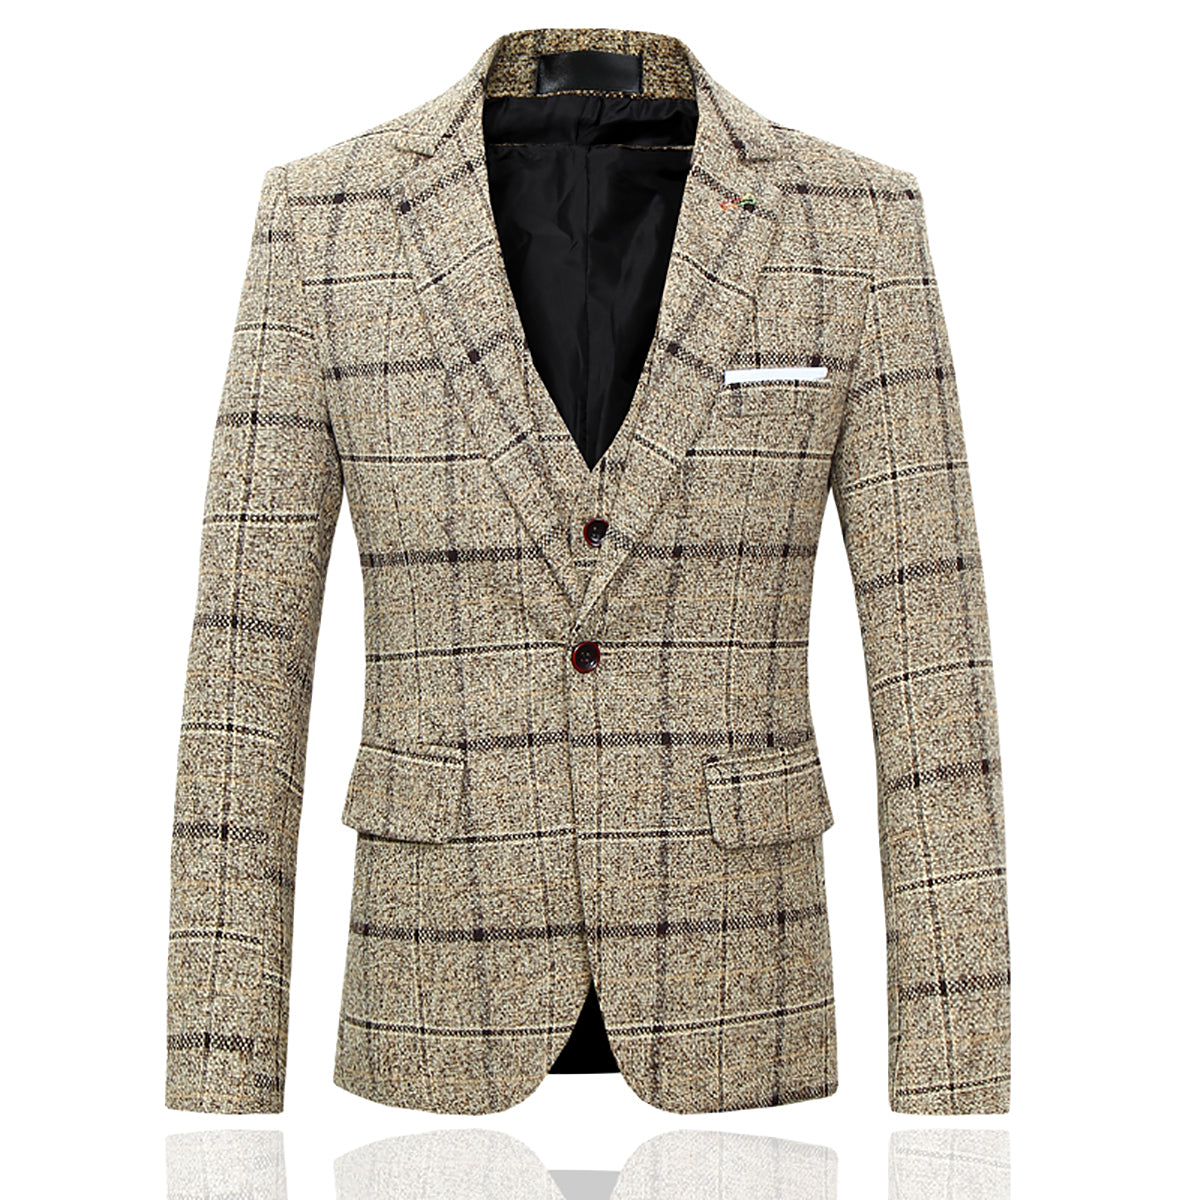 Cloudstyle, Affordable Mens Suits Online